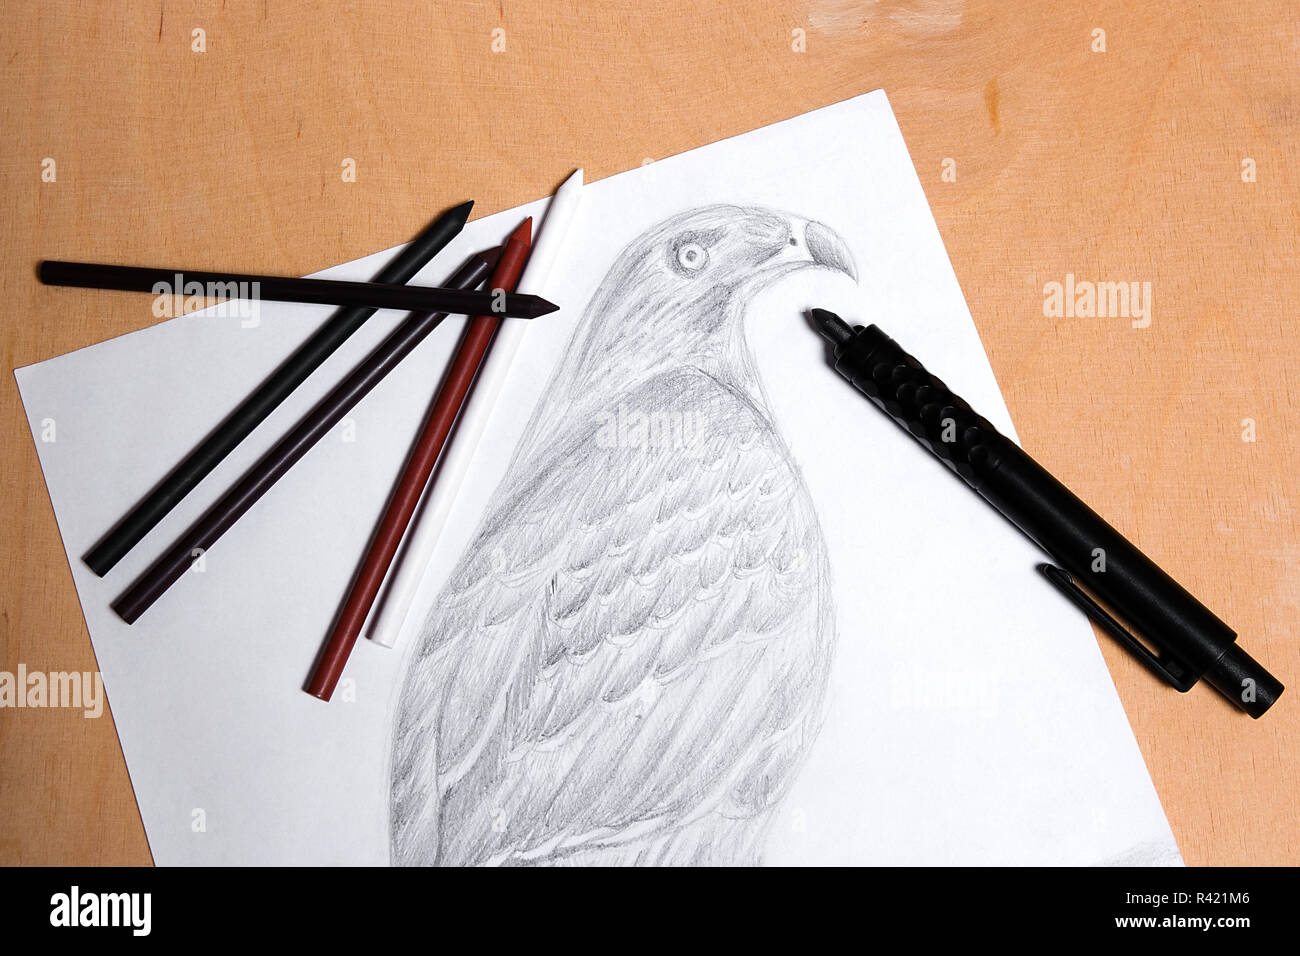 Clutch pencil with graphite drawing hawk. Stock Photo